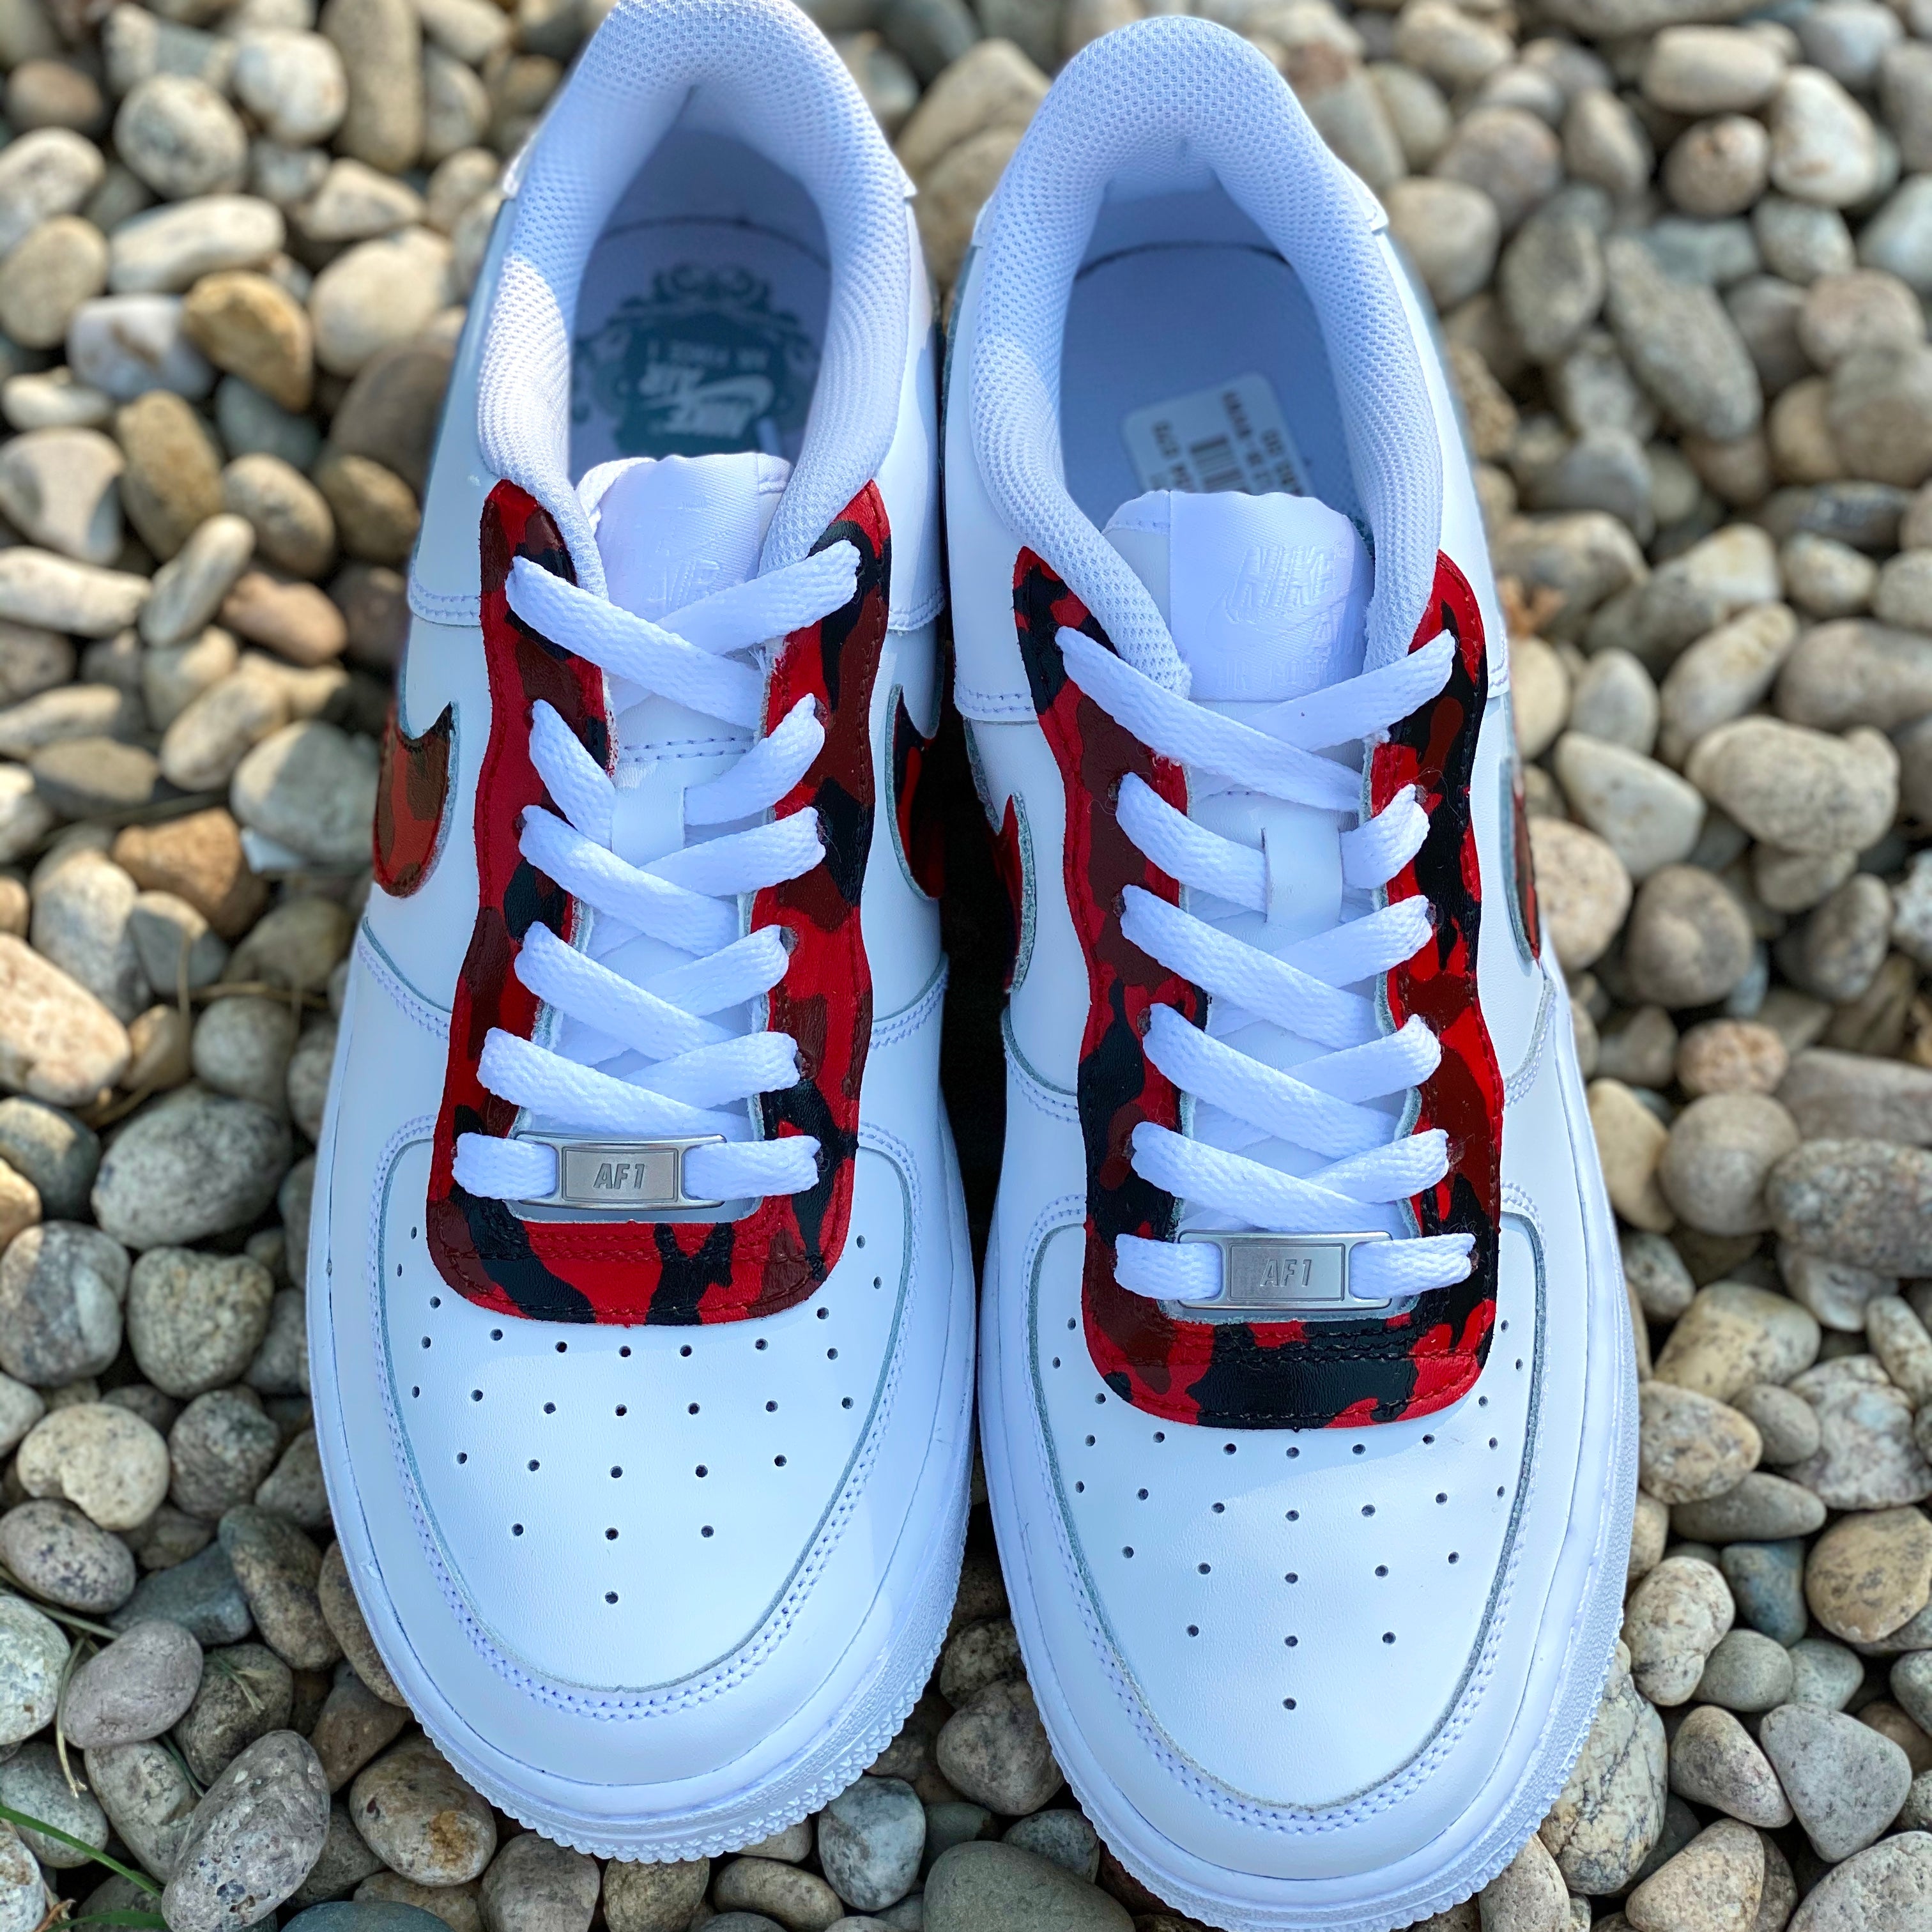 Air Force 1 Custom Sneakers Blood Drip Splatter Red Black White Shoes Af1 Shoes 10.5 Mens (12 Women's)